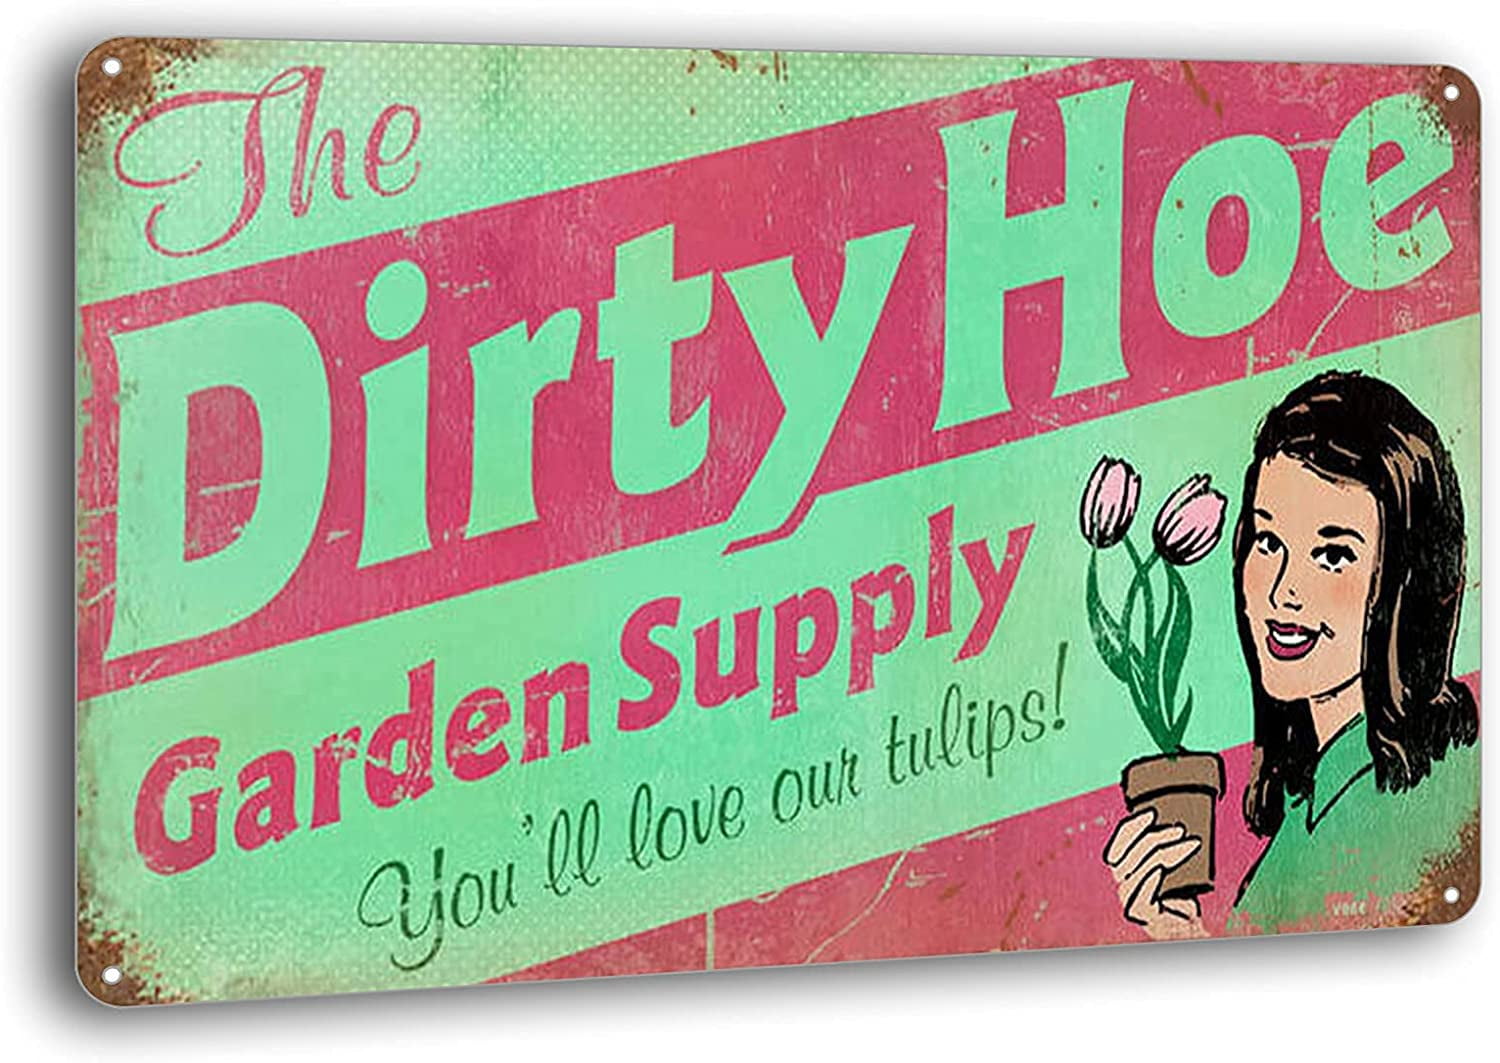 Gridley Dairy Poster Your Gridley salesman nver disappoints metal tin sign  vintage style reproduction 12 x 8 inches